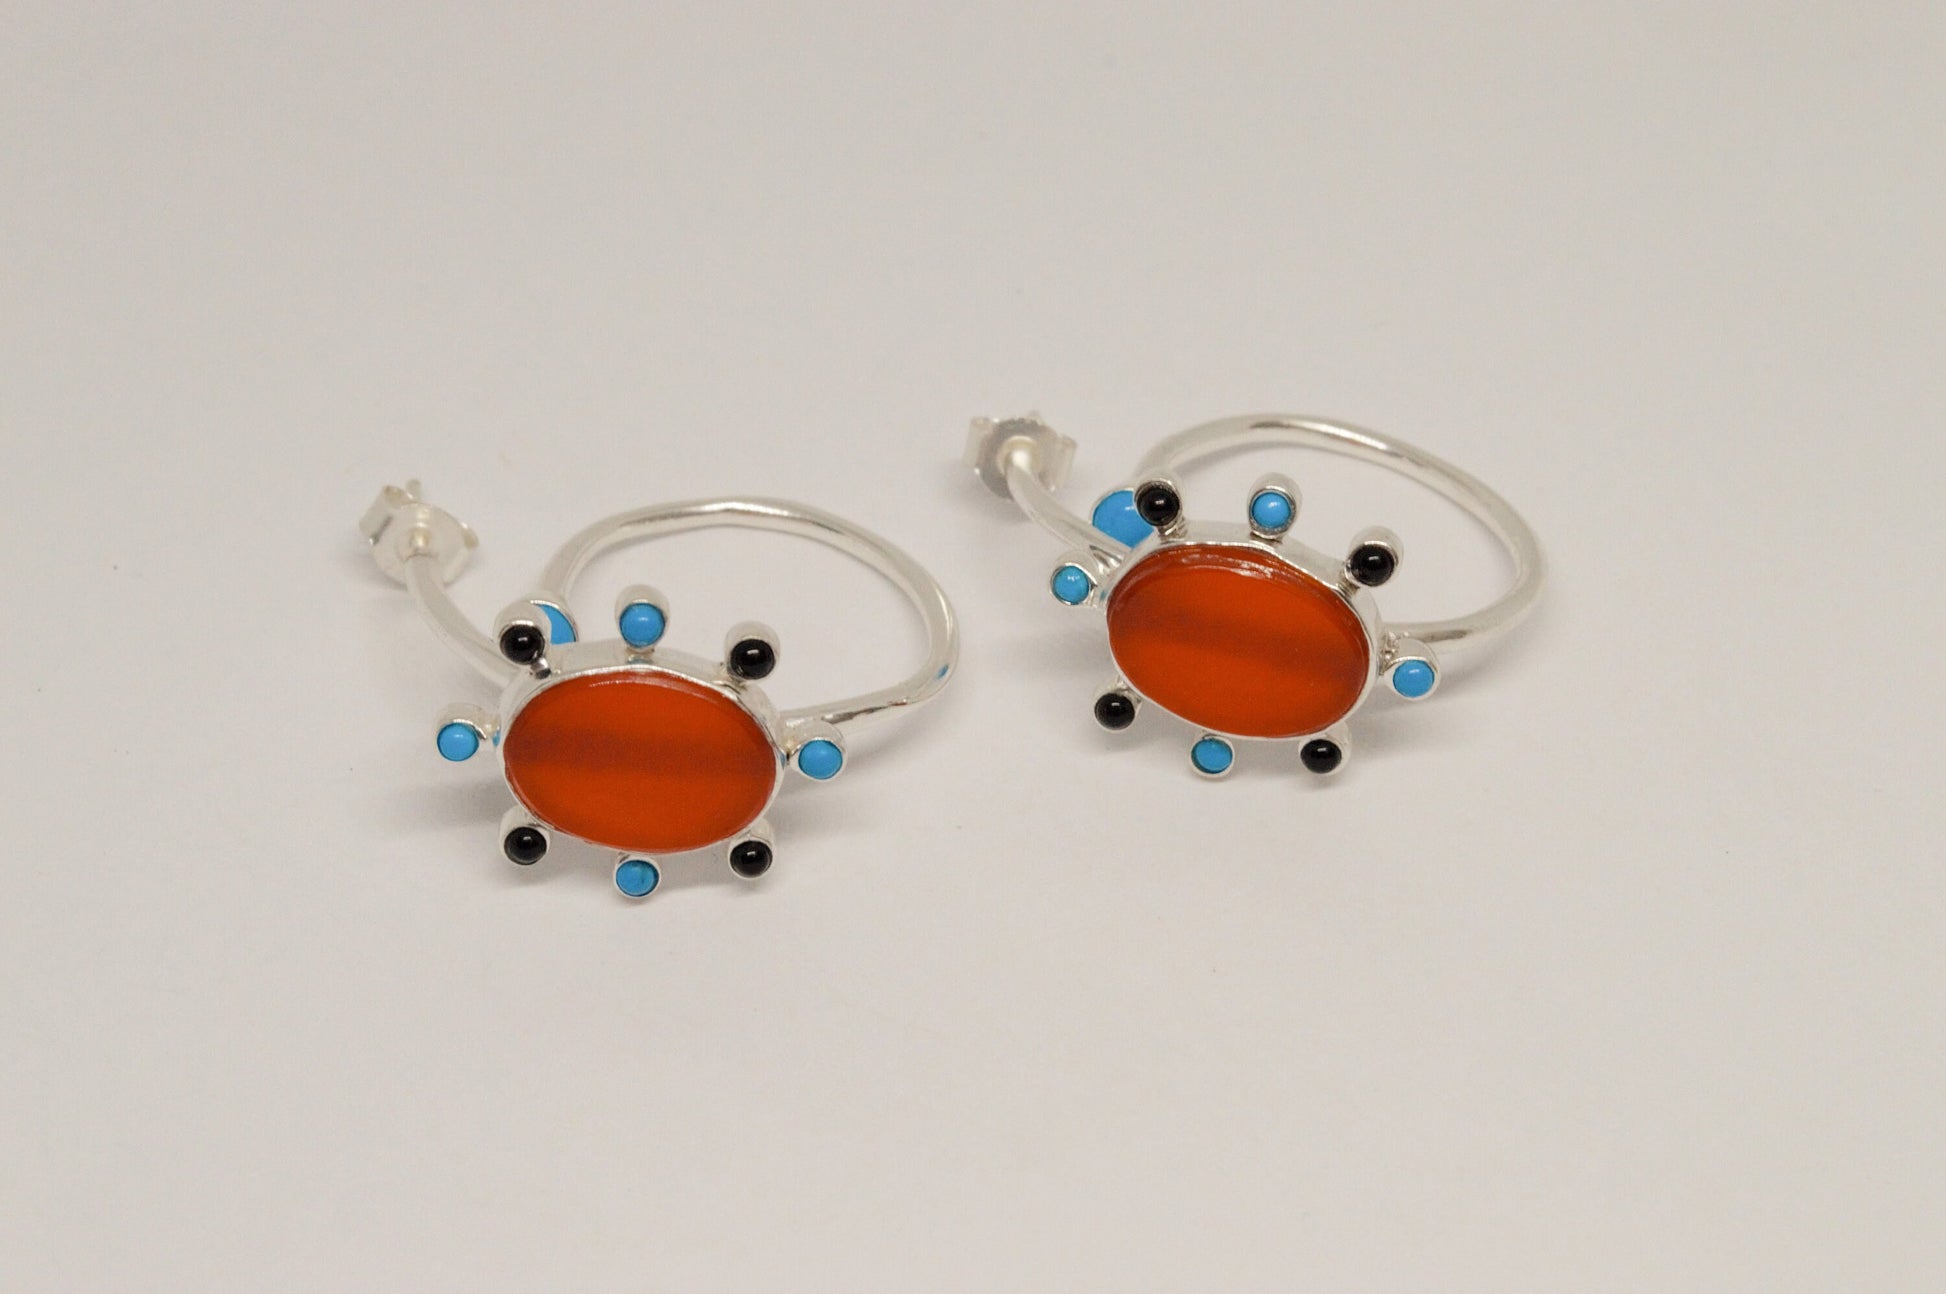 Black Onyx, Turquoise, Carnelian Earrings, Sterling Silver, Turquoise Birthstone Jewelry, Unique Gemstone Earrings, Gift for her